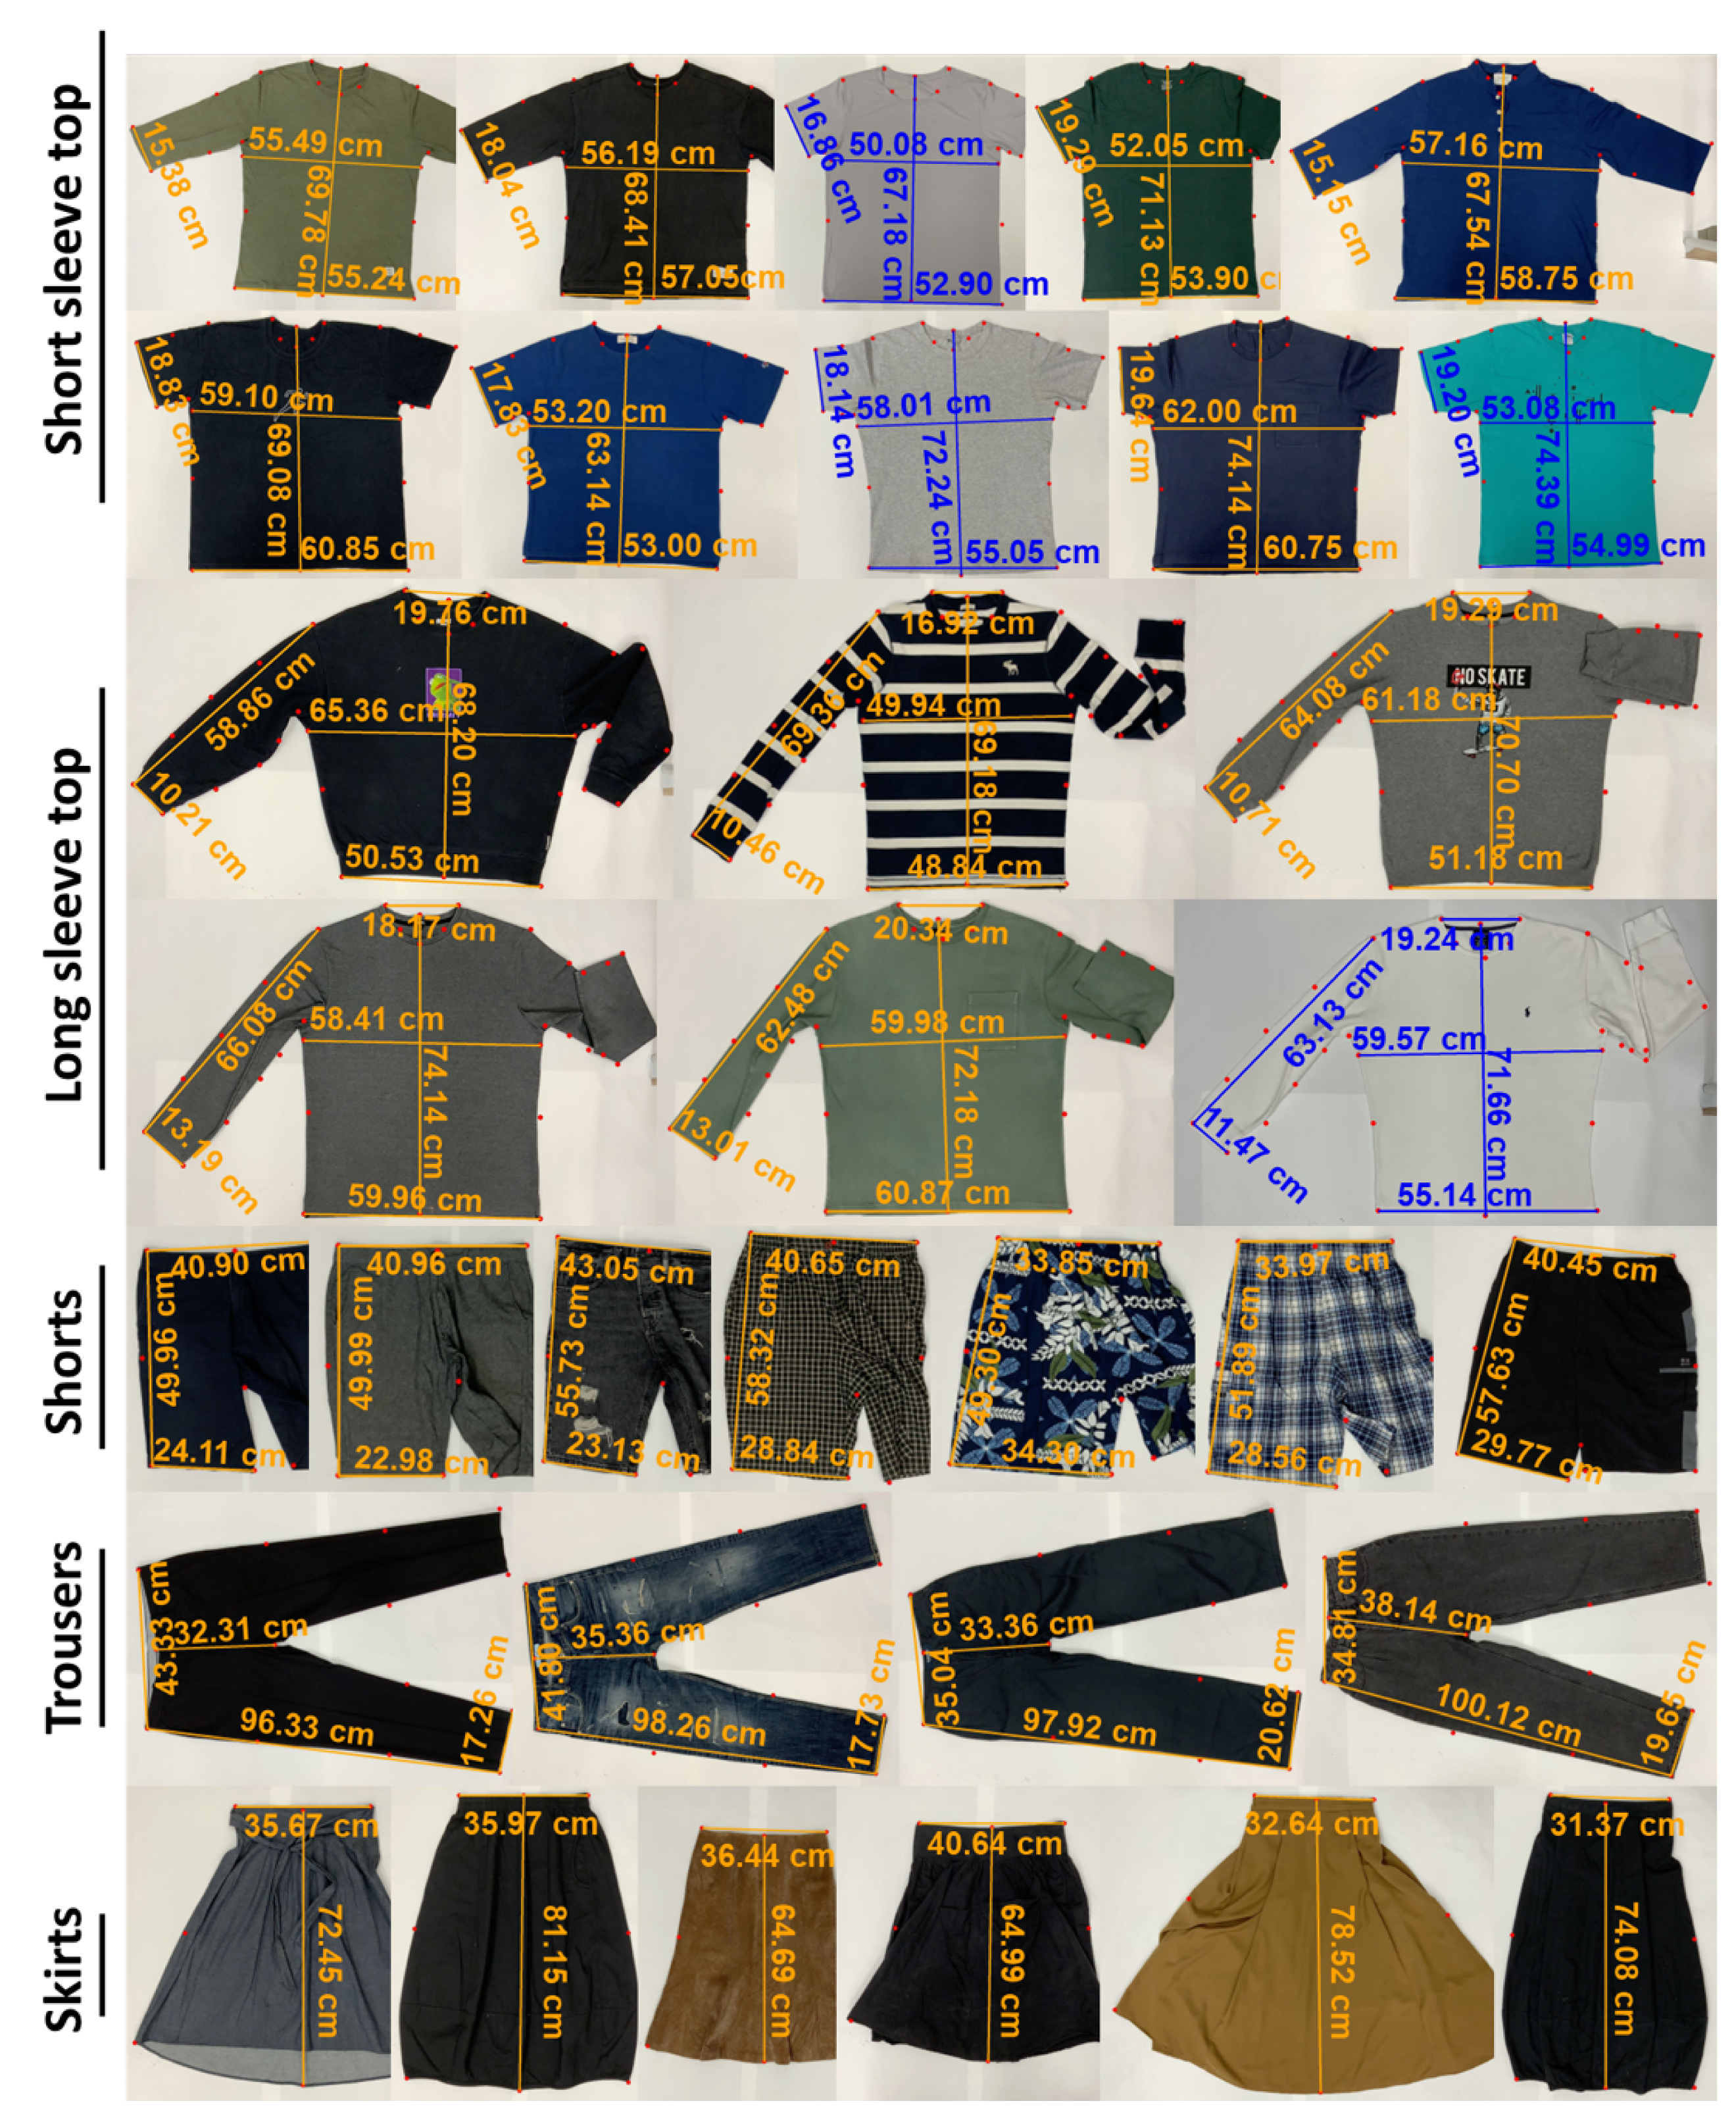 Applied Sciences | Free Full-Text | Automatic Measurements of Garment Sizes  Using Computer Vision Deep Learning Models and Point Cloud Data